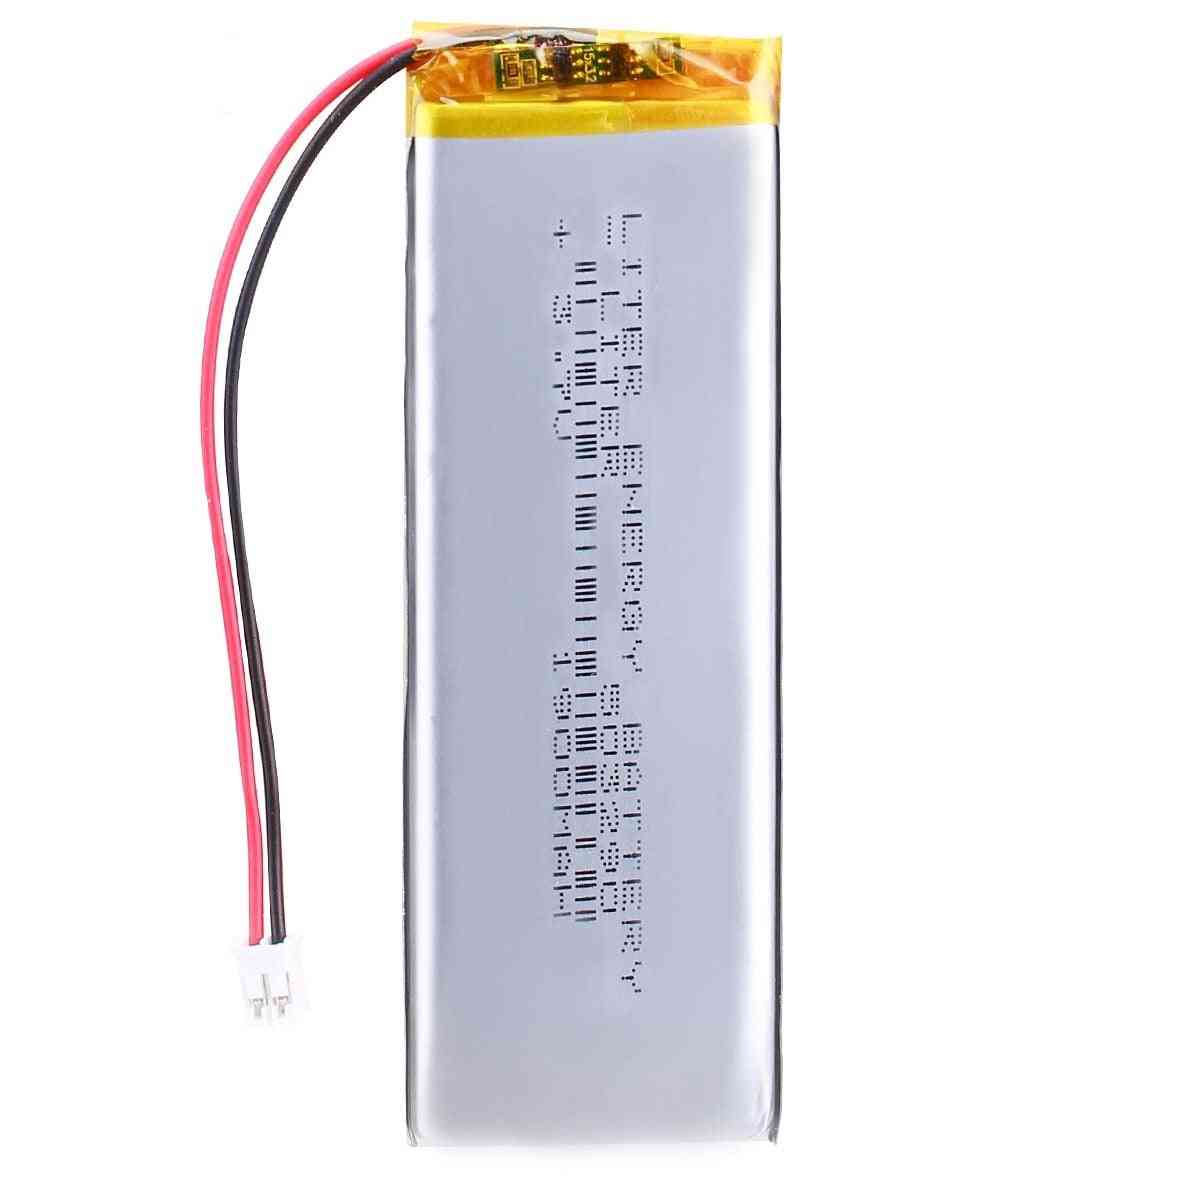 Tablet Computer Battery Versal Li-ion Battery For Tablet